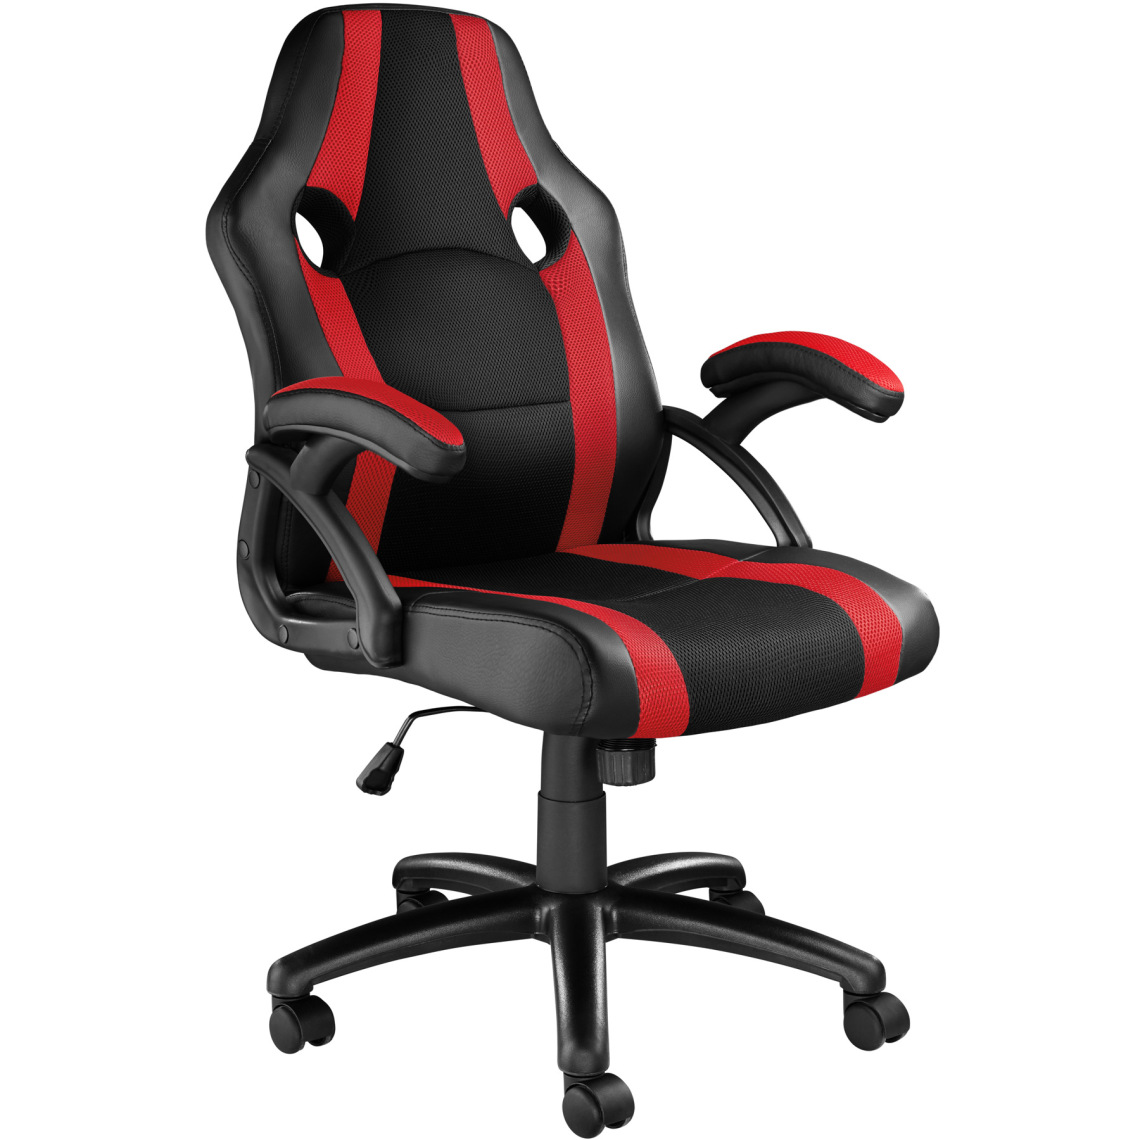 Tectake - Chaise gamer BENNY - noir/rouge - Chaises